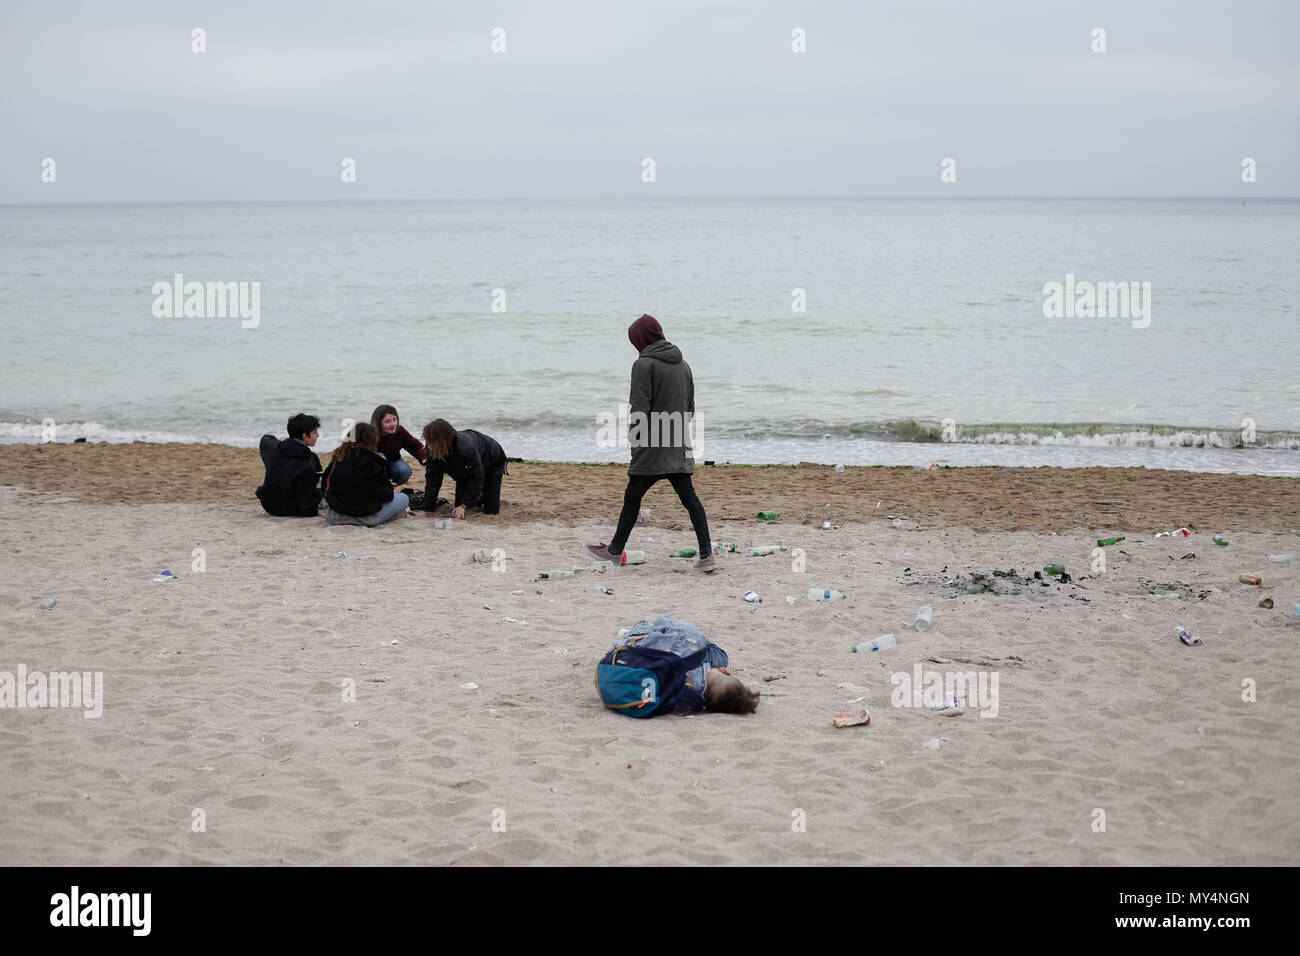 VAMA VECHE, ROMANIA - MAY 1, 2018: Young people rest on the beach amongst debris (especially empty bottles), after partying all night, early in the mo Stock Photo